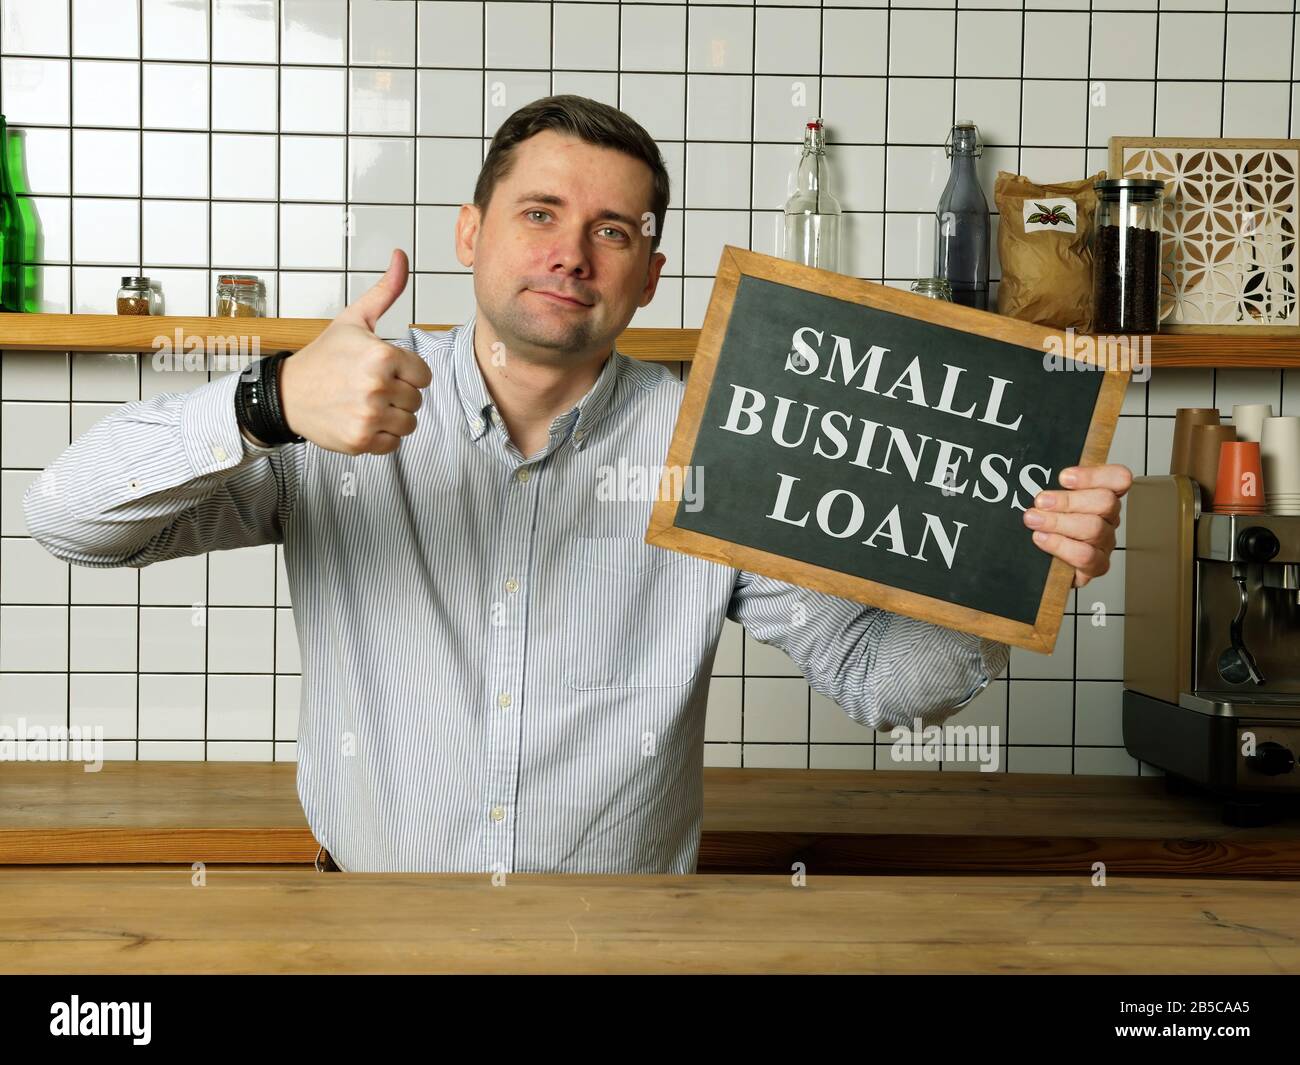 Small business loan in the businessman hands. Stock Photo